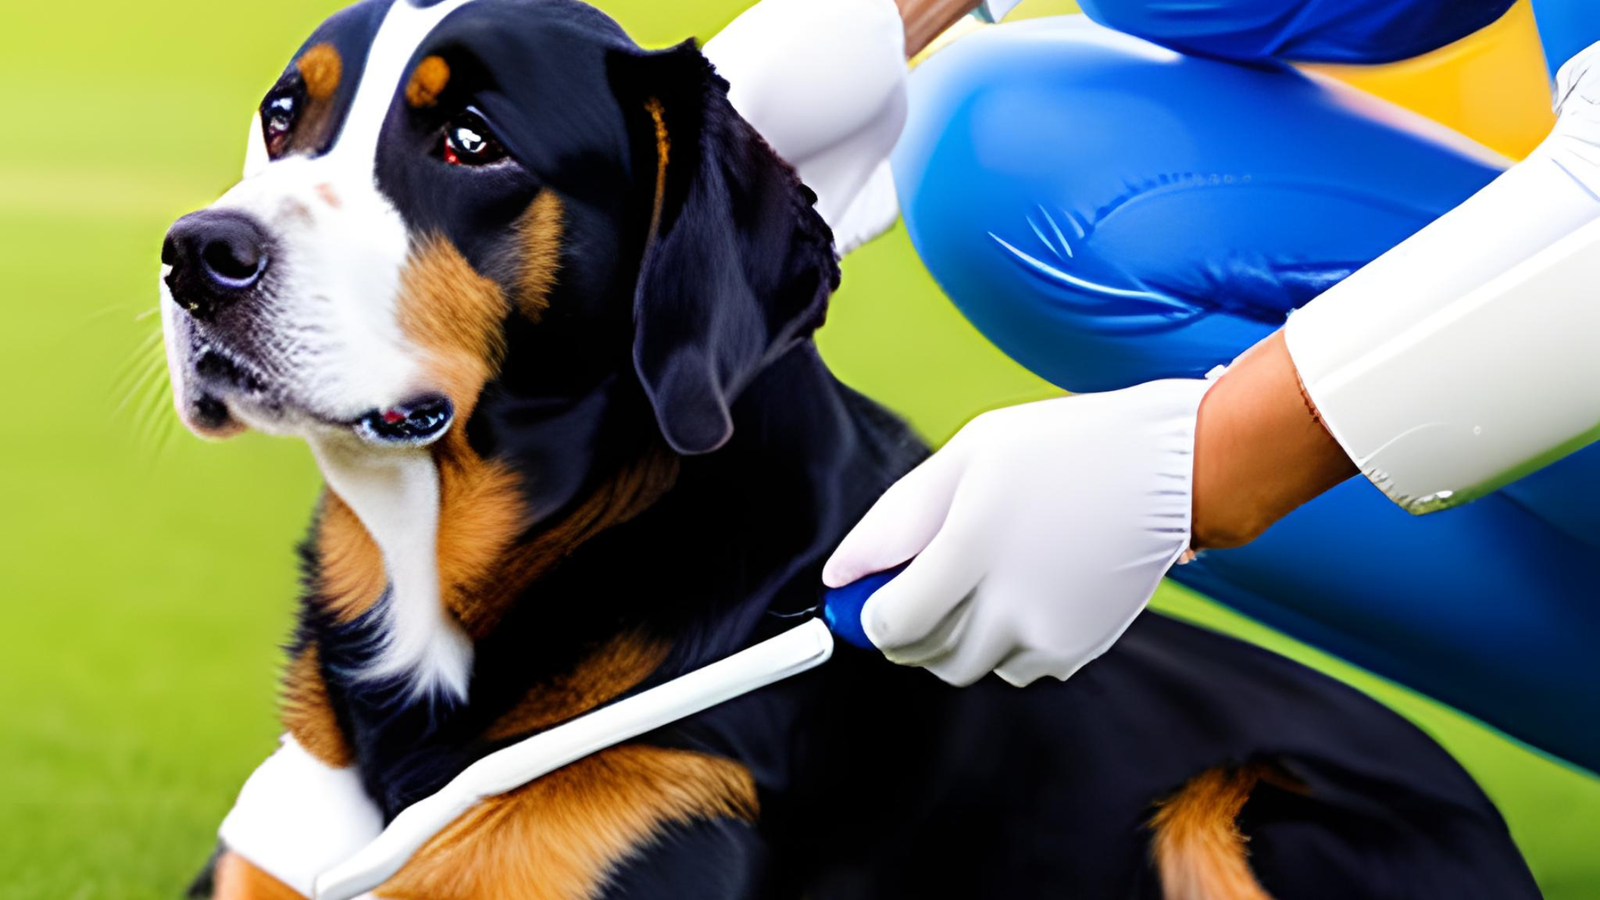 Can You Use Dermoplast on Dogs?